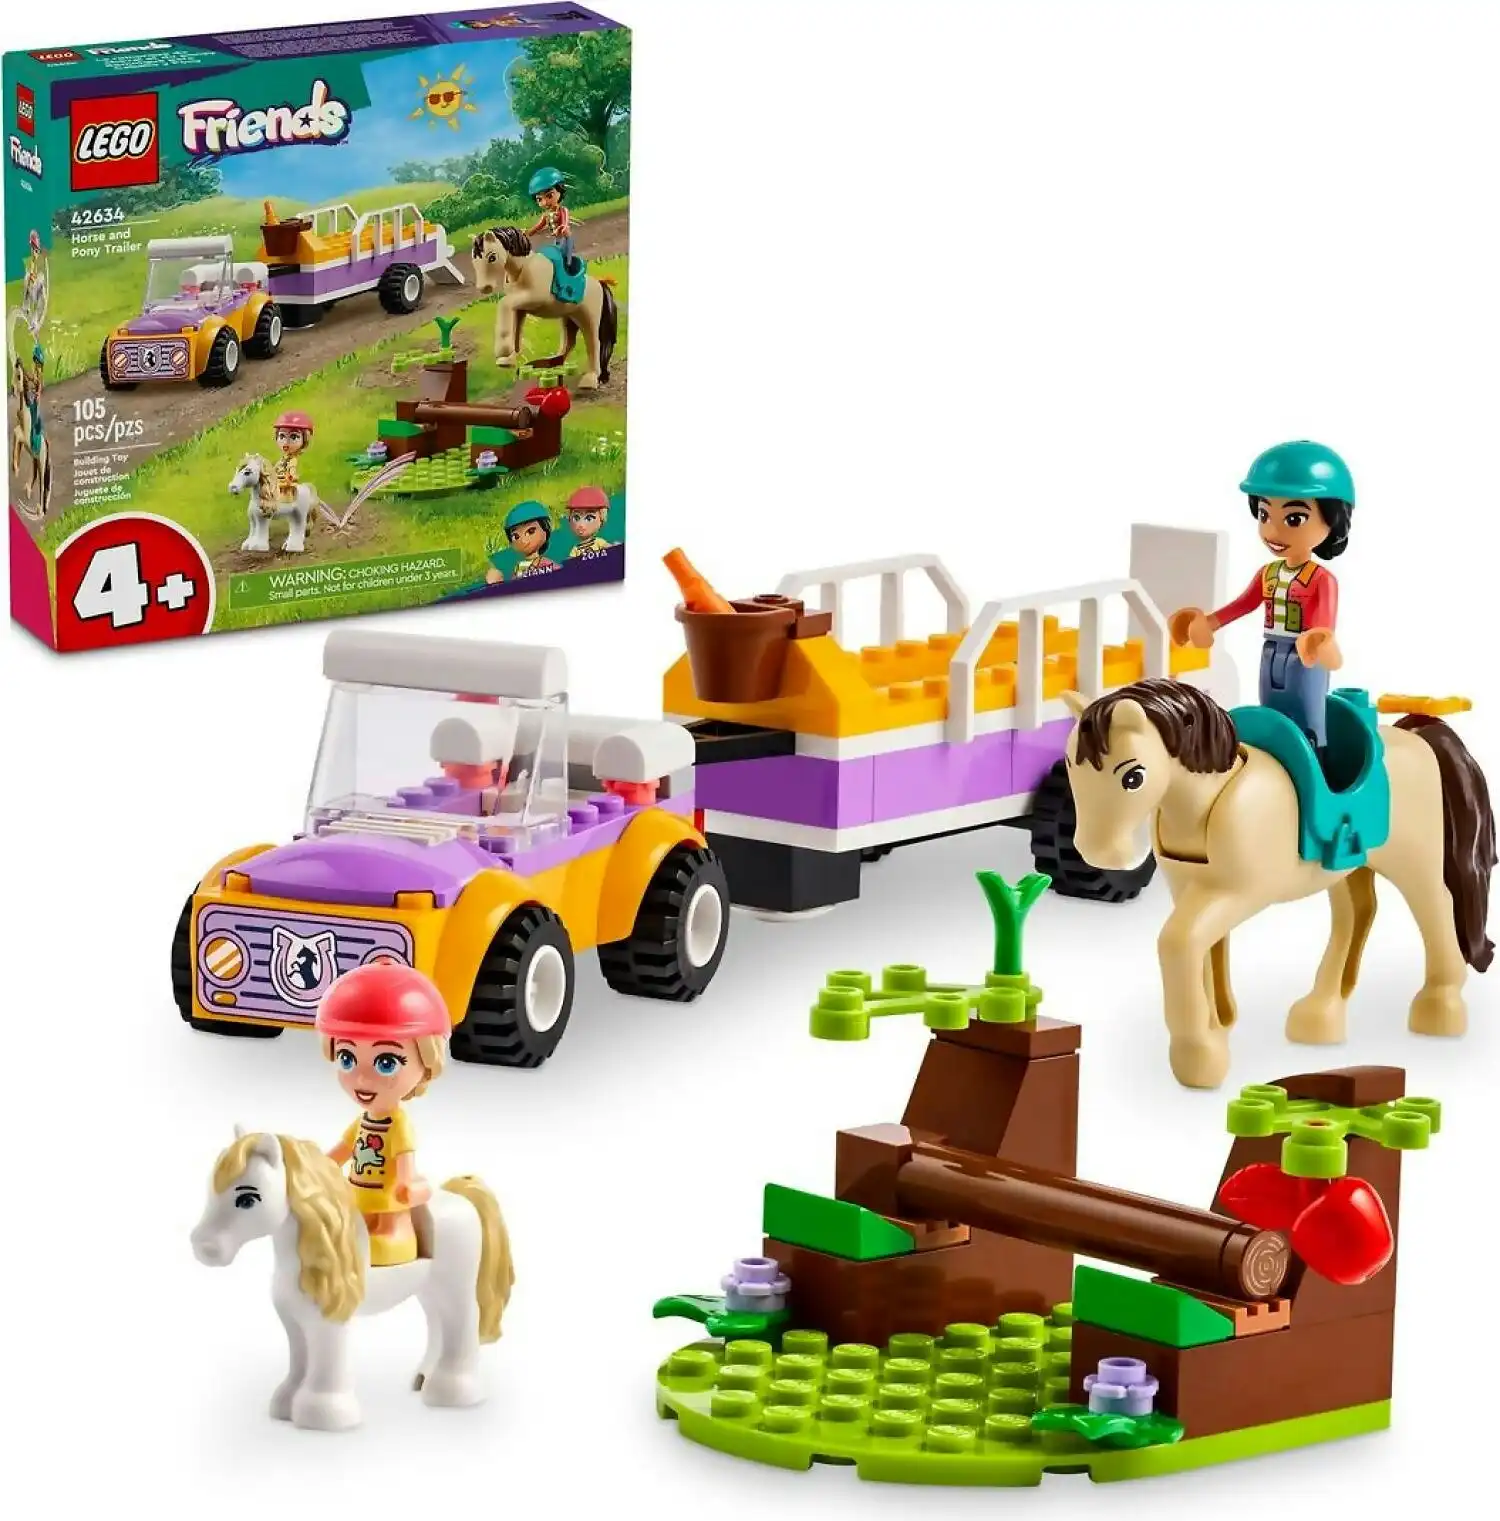 LEGO 42634 Horse and Pony Trailer - Friends 4+